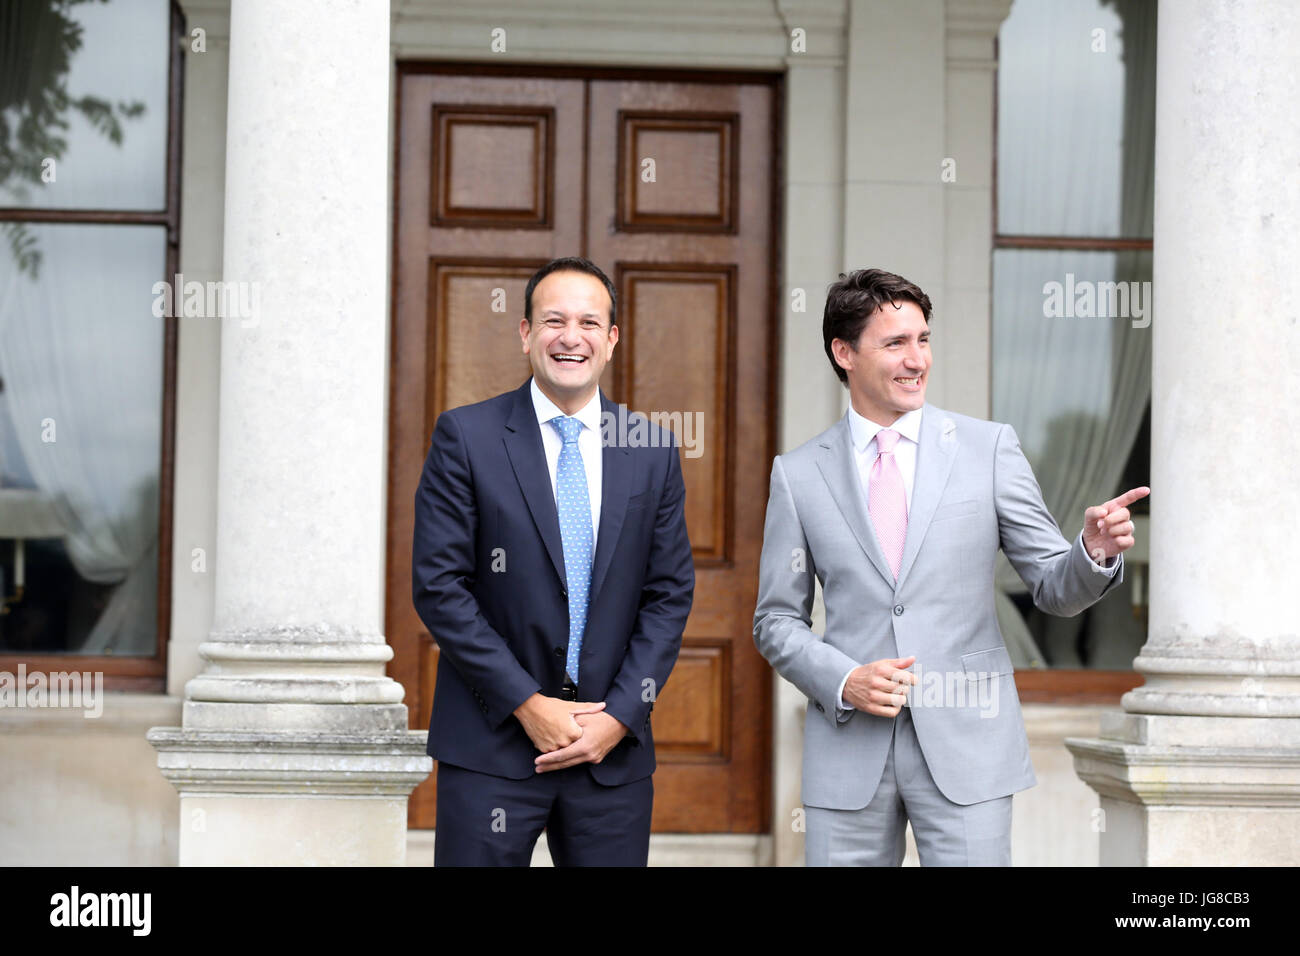 4/7/2017. Prime Ministers, Justin Trudeau of Canada and Leo Varadkar of Ireland, at play with hurley stick and ball, during Mr. Trudeau's official visit to Ireland. Hurling is believed to be the fastest field sport in the world. The recently elected Mr. Varadkar is believed to be the first openly gay male leader of a country. Stock Photo